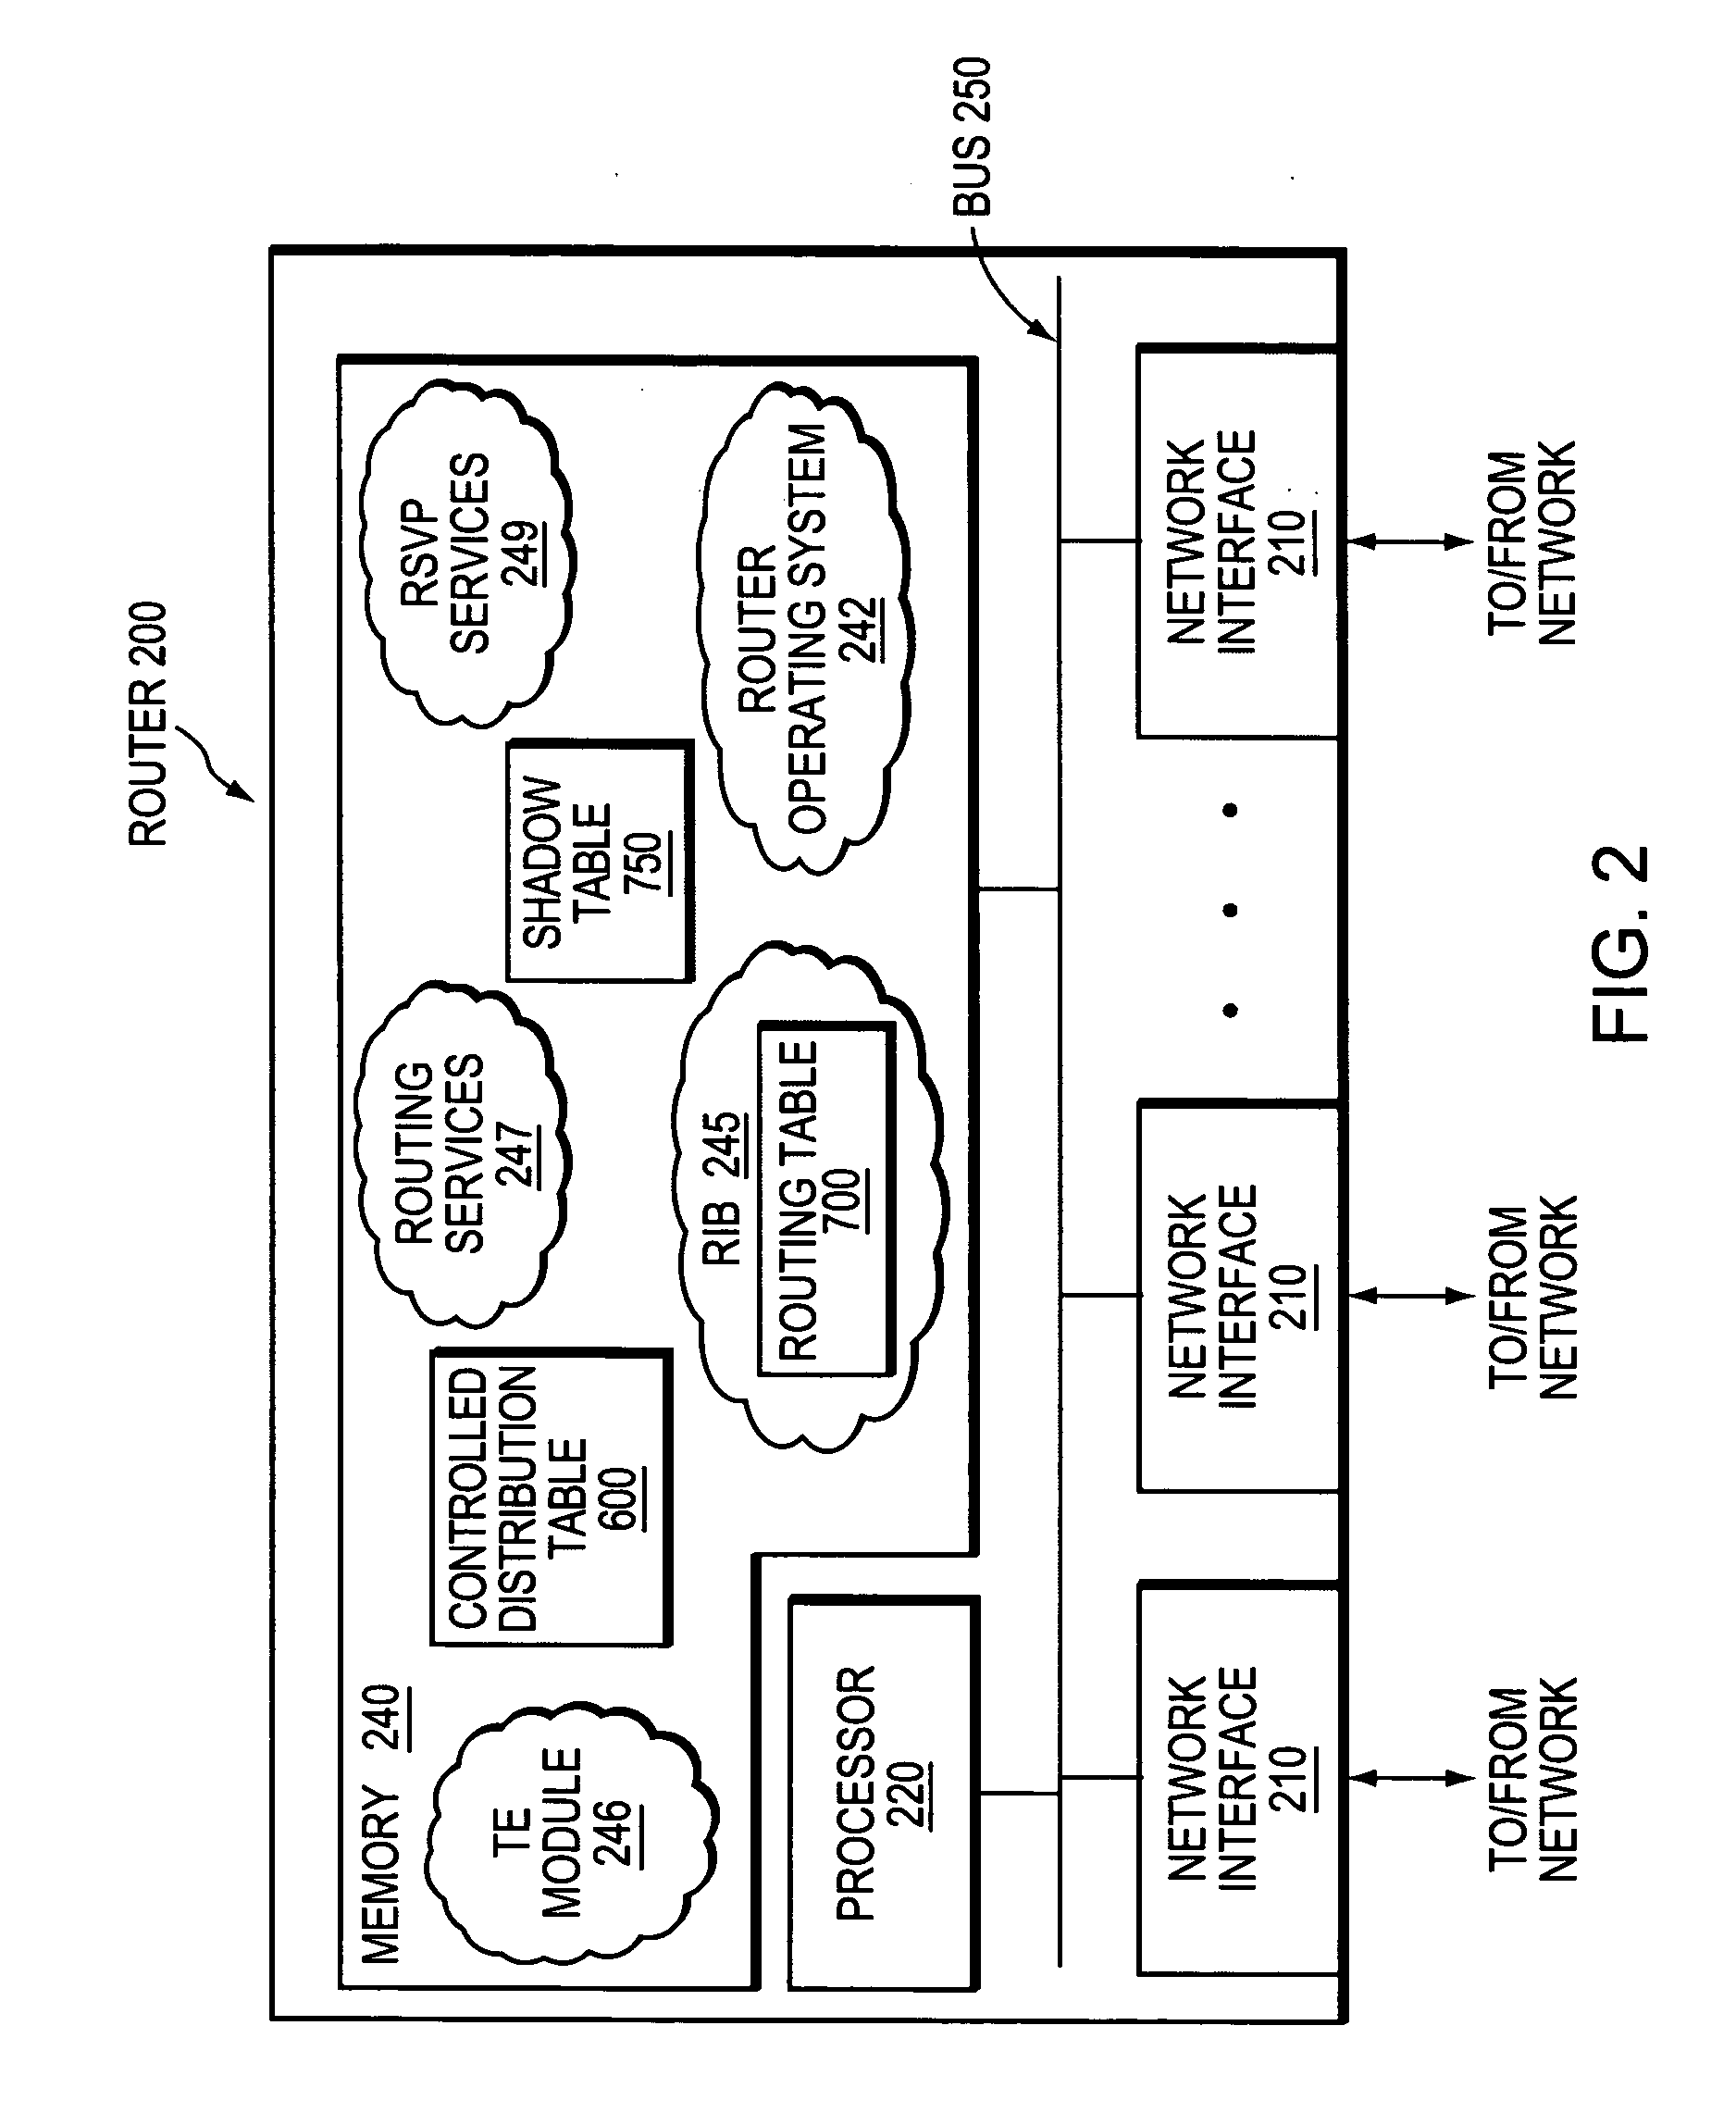 Controlled distribution of inter-area routing information